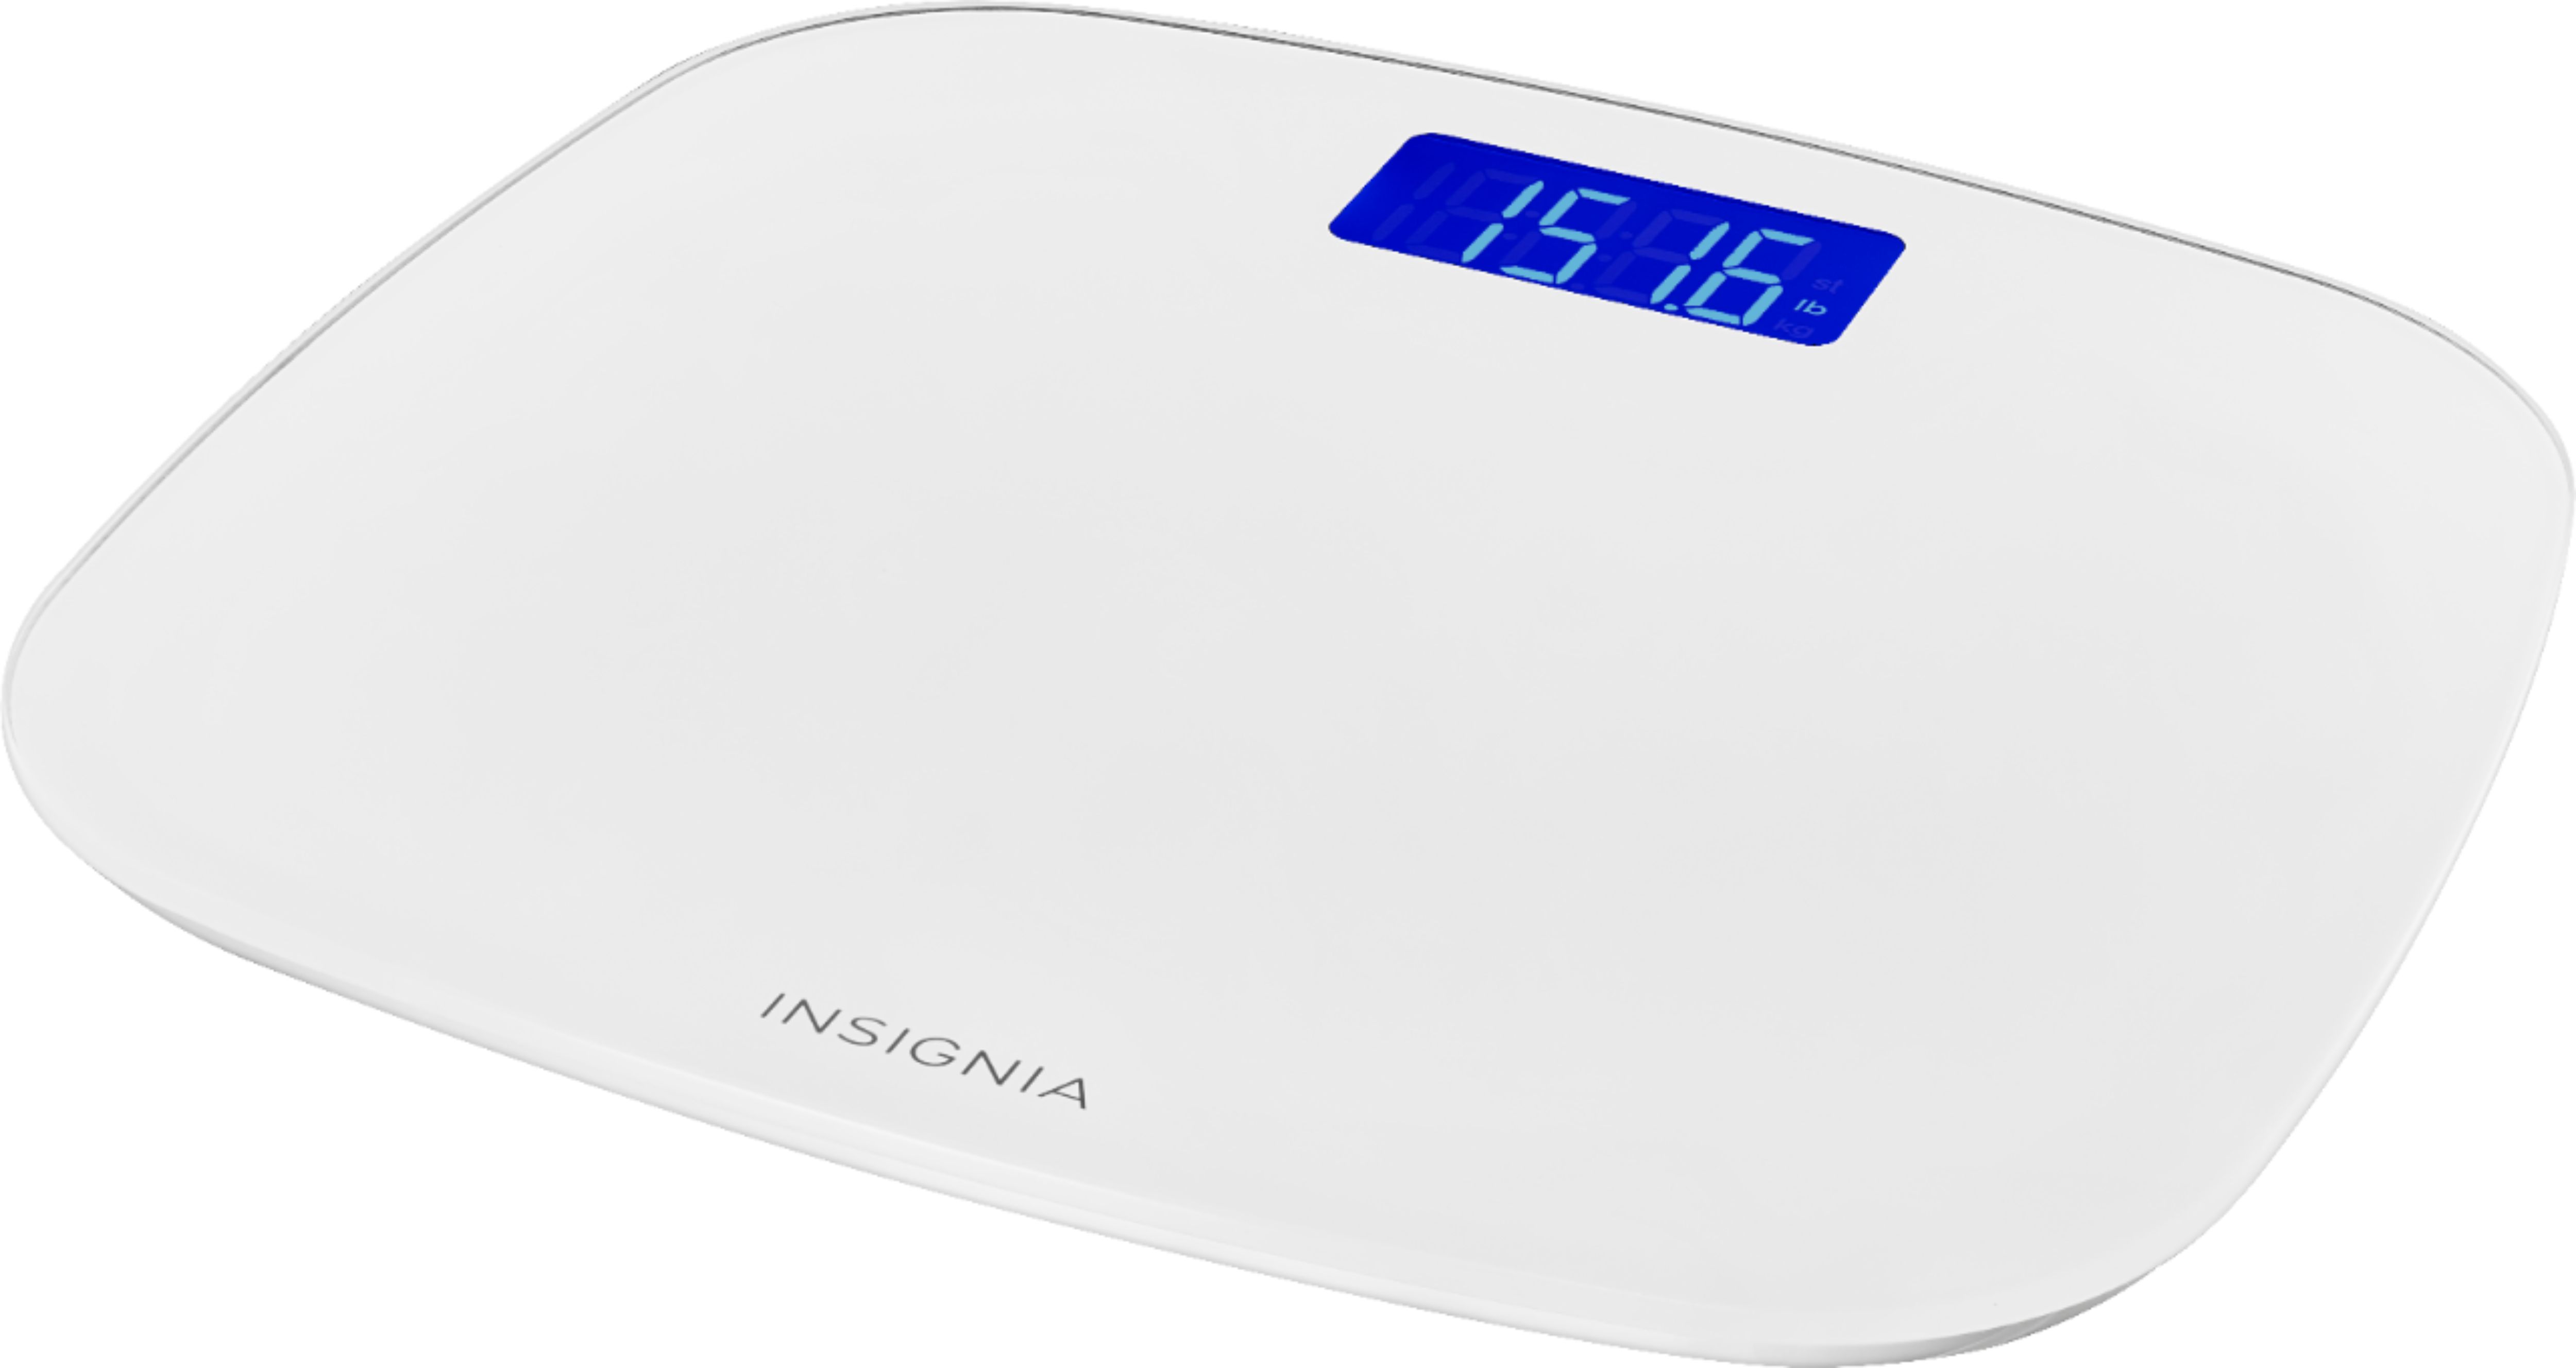 Best Buy: Insignia™ Tempered Glass Digital Scale White NS-GLSSCW1